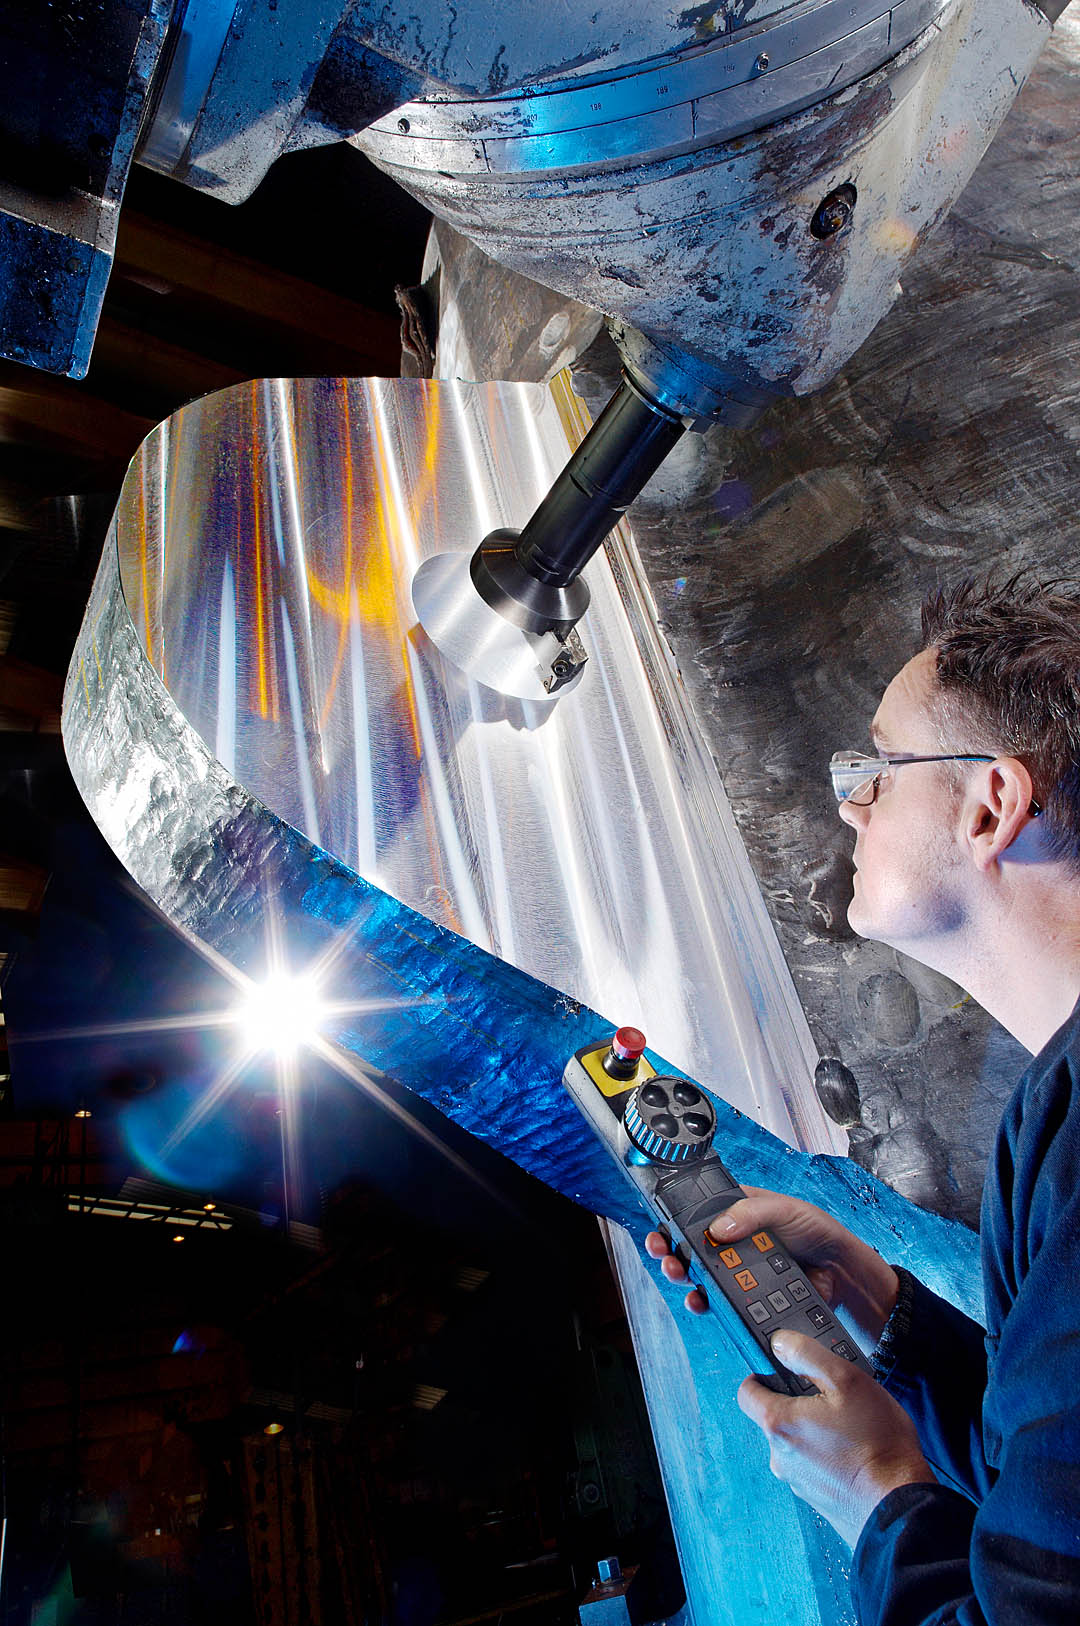 Commercial Photographer: Steel casting and manufacture, horizontal boring, Middlesbrough, England, UK